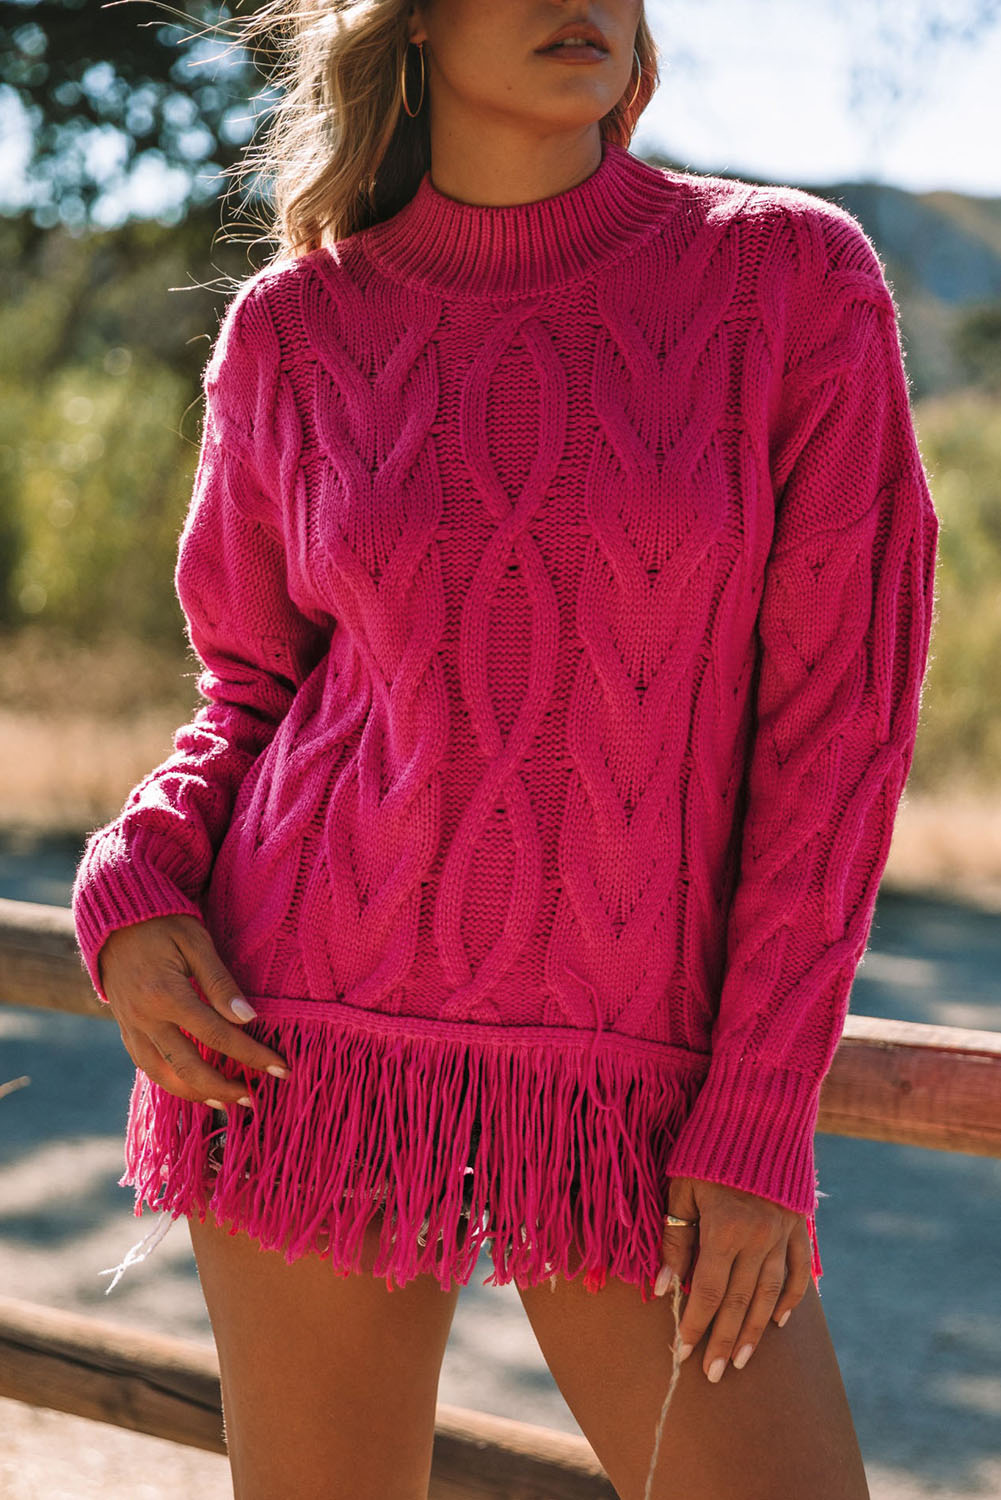 High Neck Cable Knit Tasseled Sweater